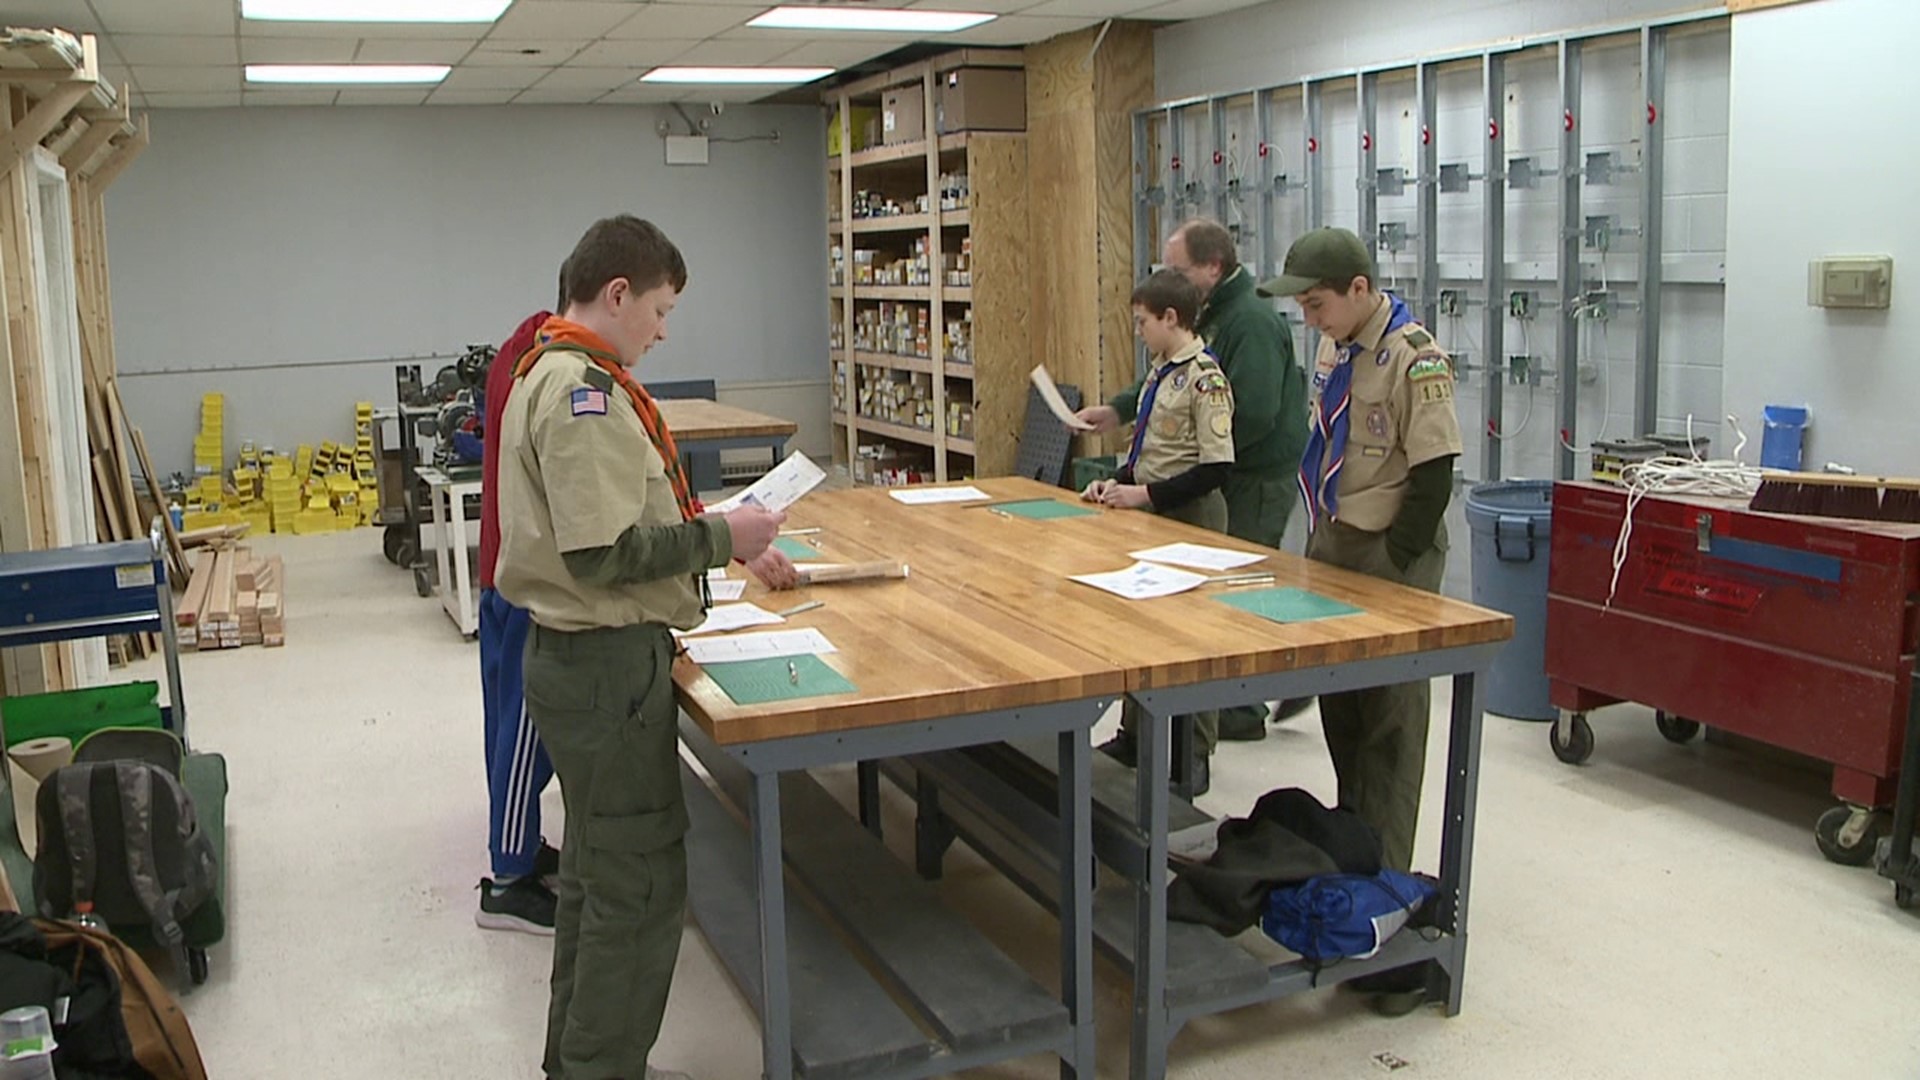 Boy Scouts from across our region took over Johnson College Saturday to sharpen their skills while also having some fun.